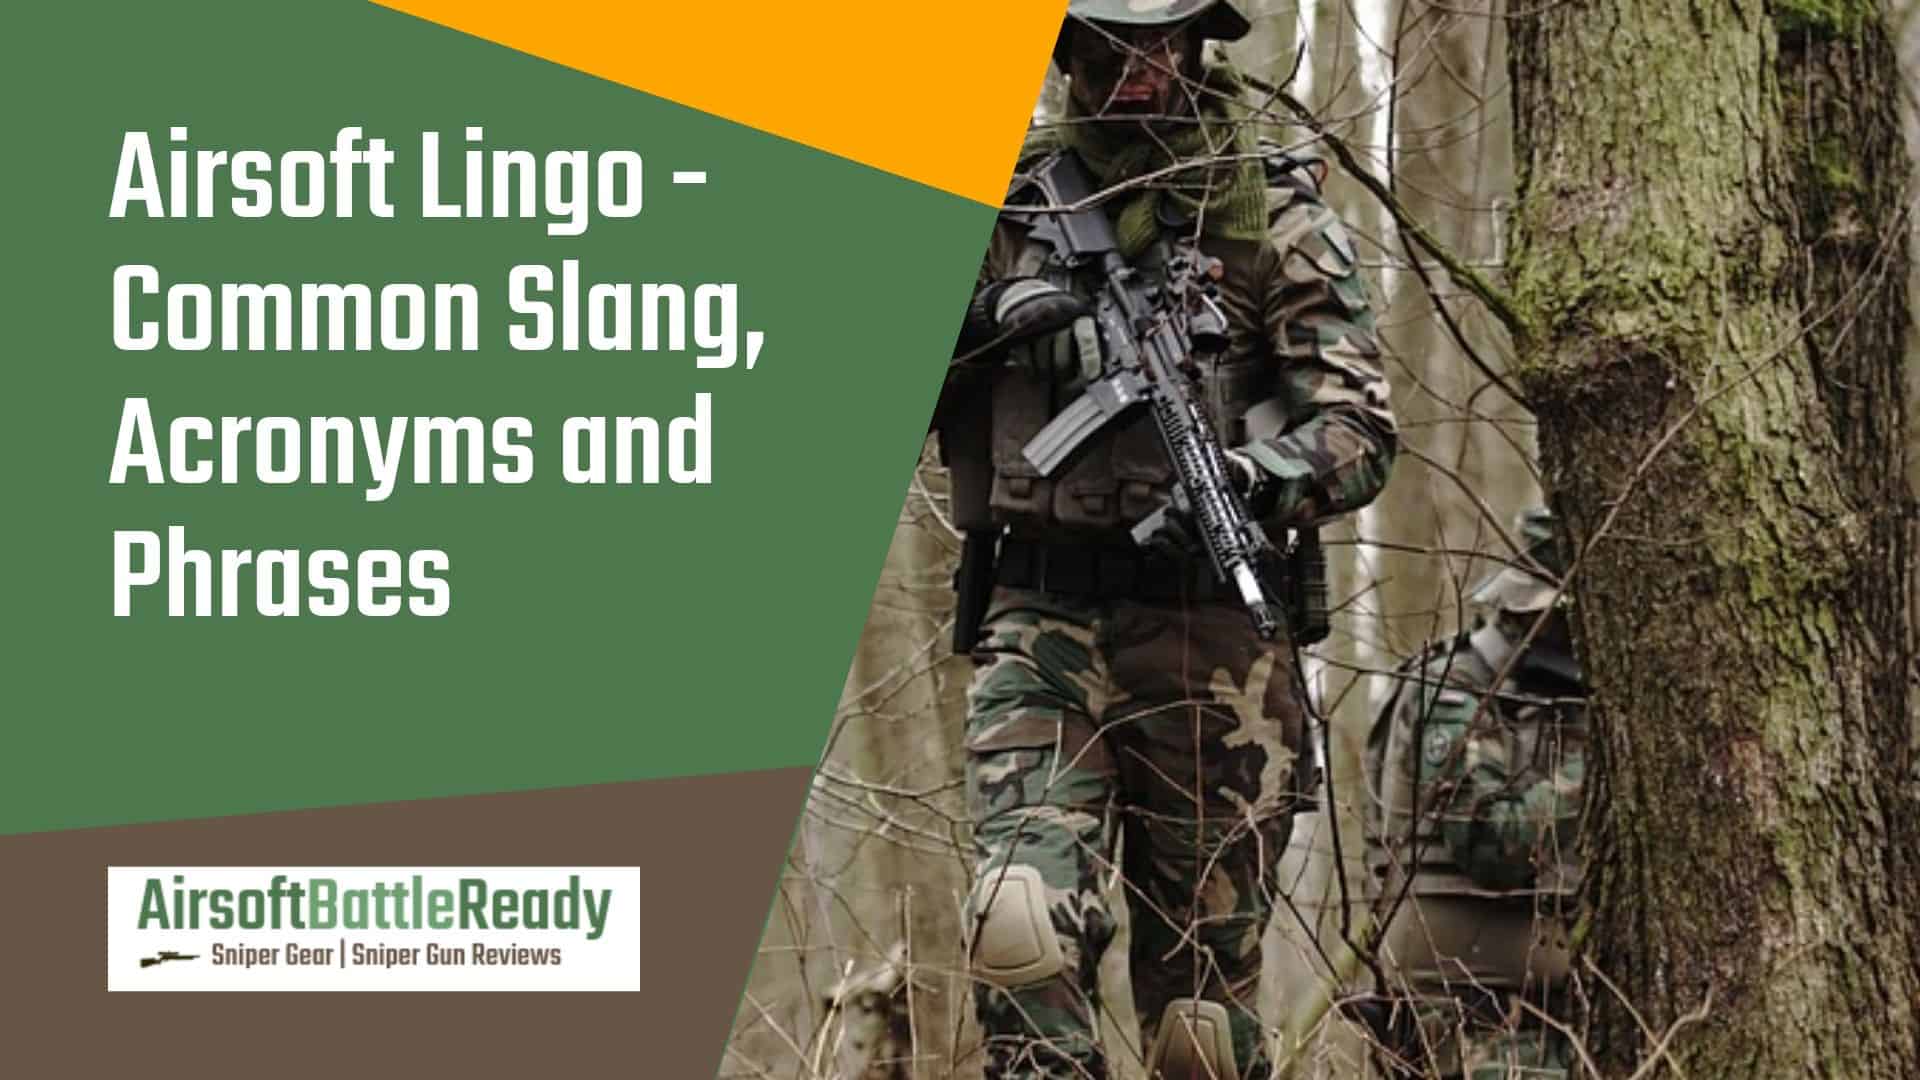 Airsoft Lingo - Common Slang Acronyms and Phrases - Airsoft Battle Ready